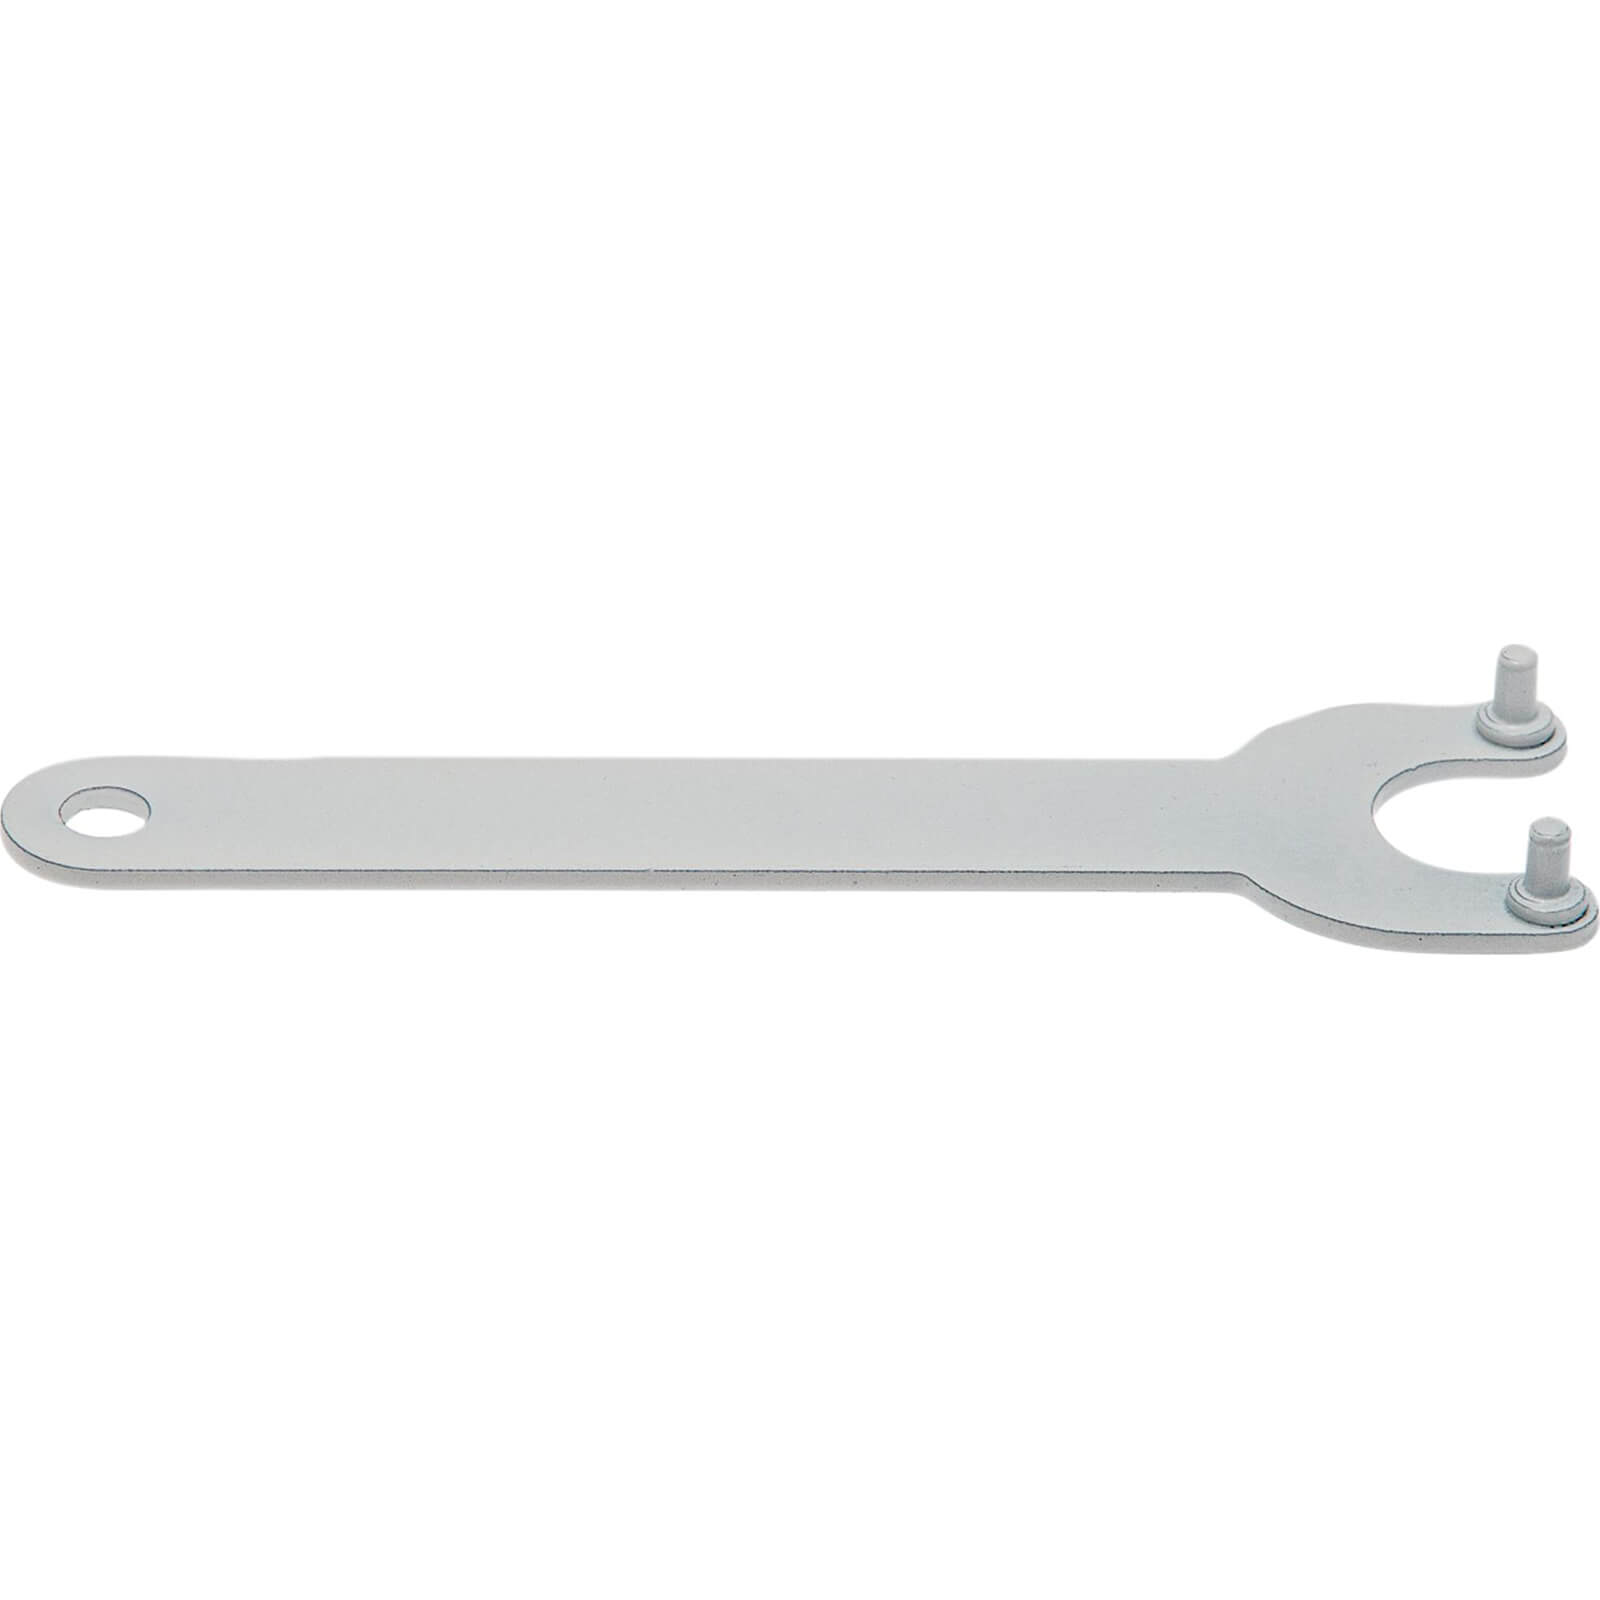 Photo of Flexipads 30-4 White Angle Grinder Pin Spanner